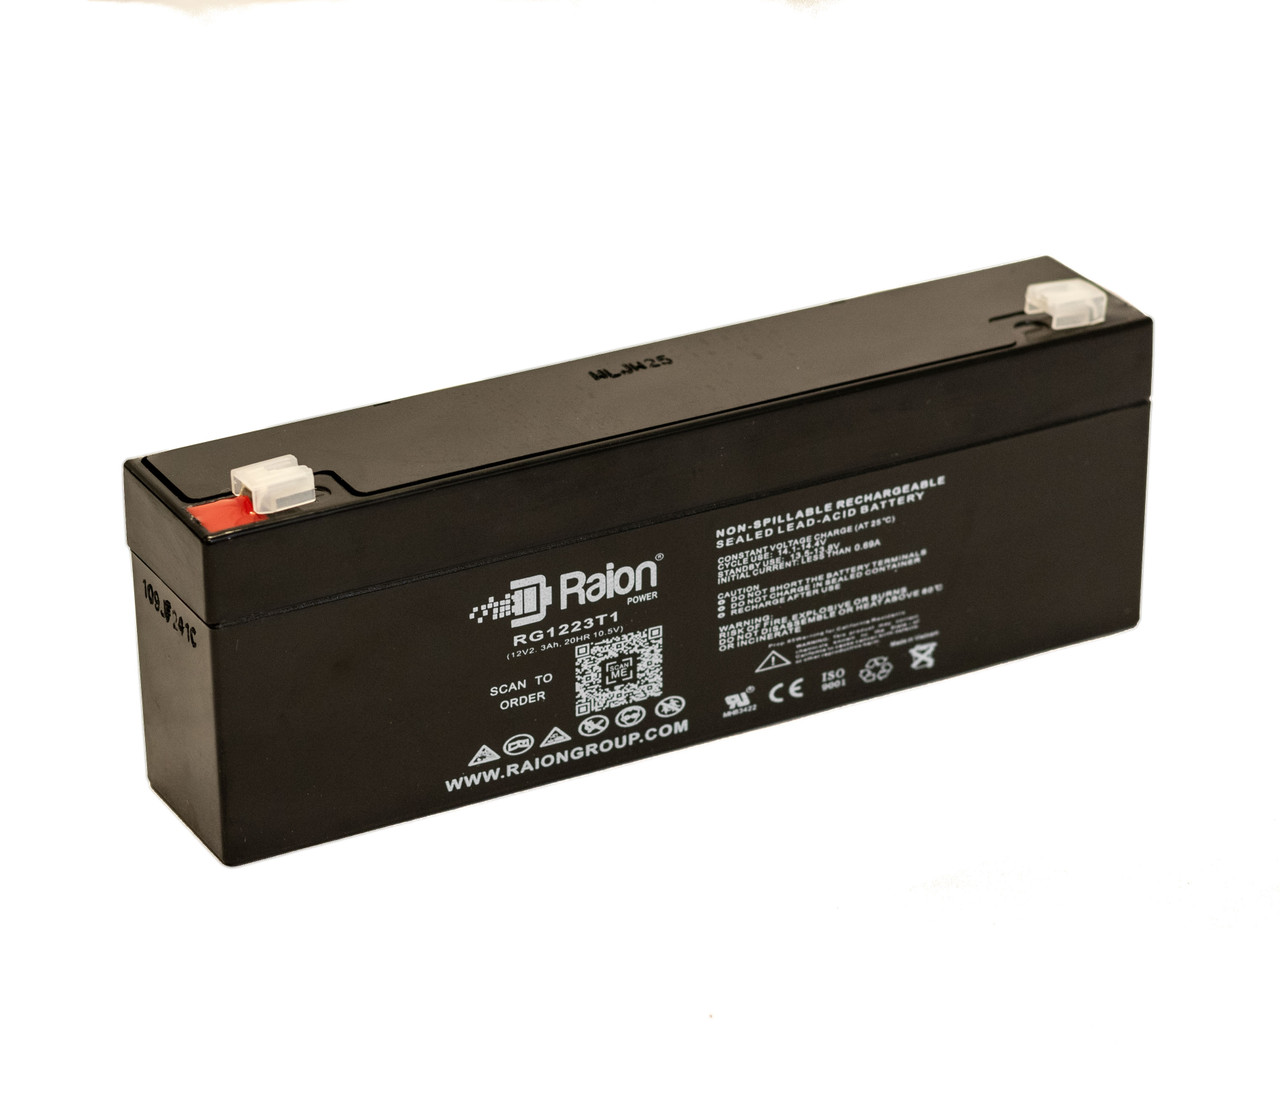 Raion Power RG1223T1 Replacement Battery for Spacelabs Medical 2 PC Display